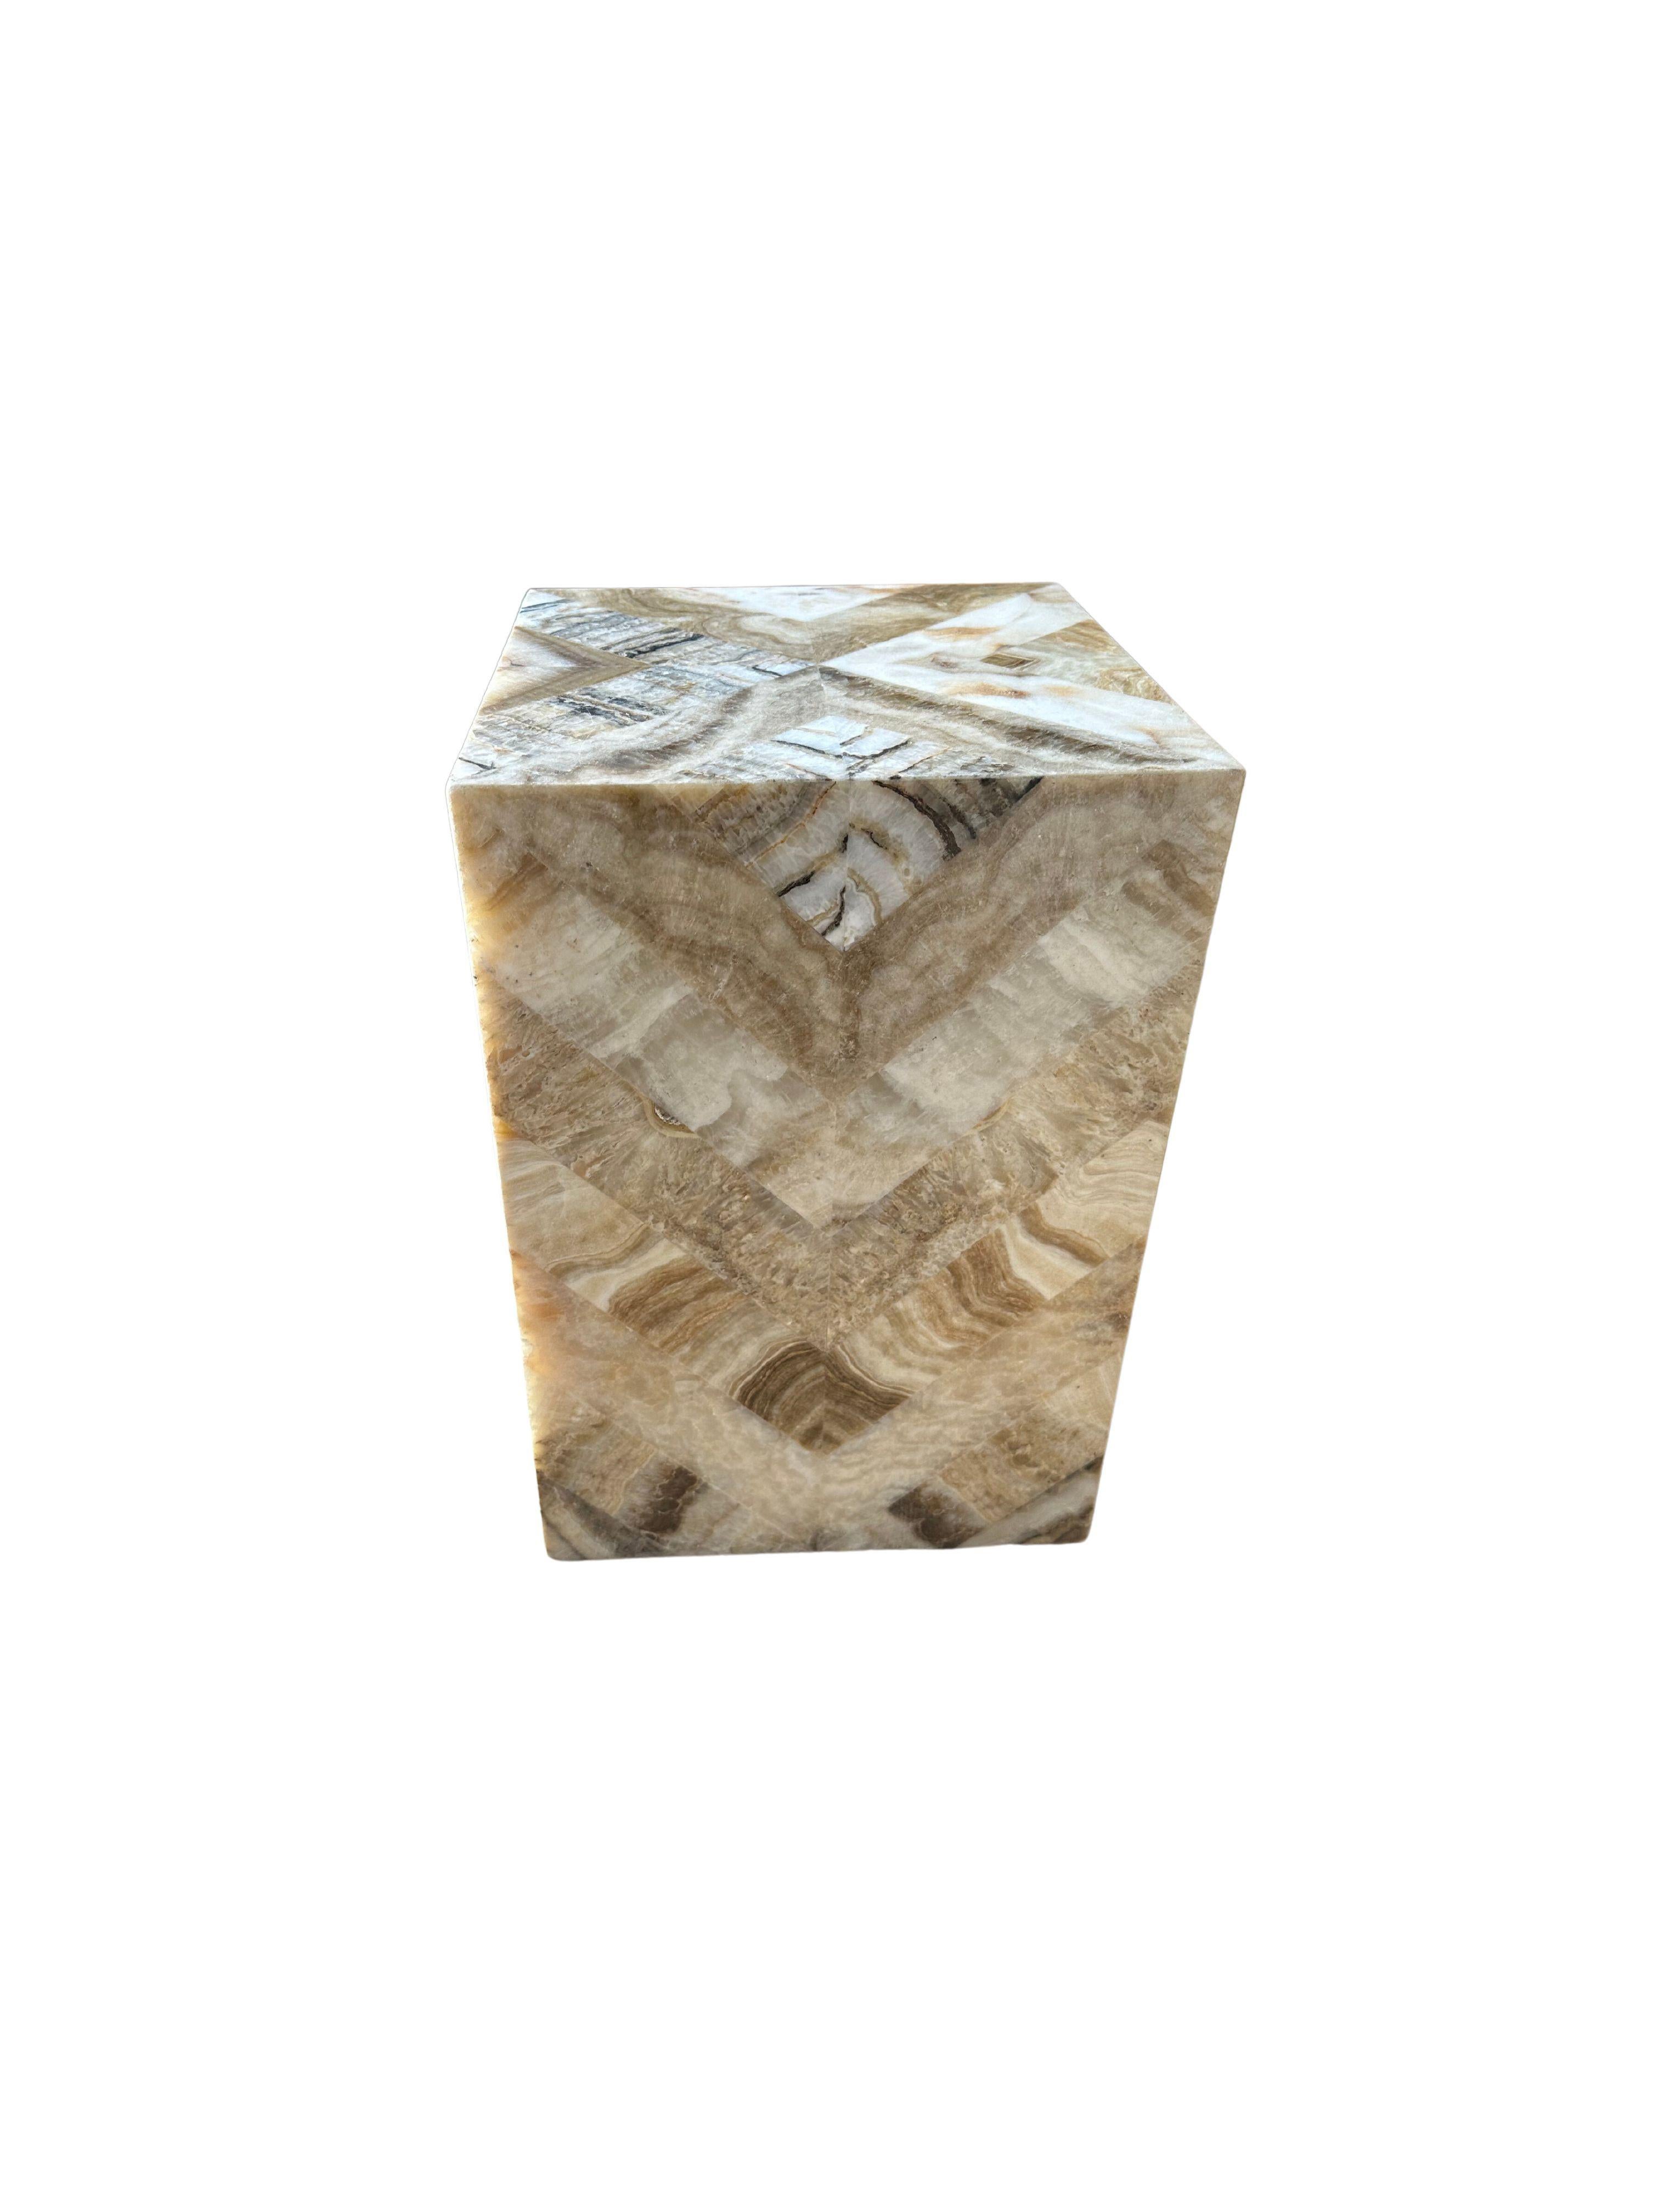 Hand-Crafted Herringbone Patterned Marble Side Table, Modern For Sale